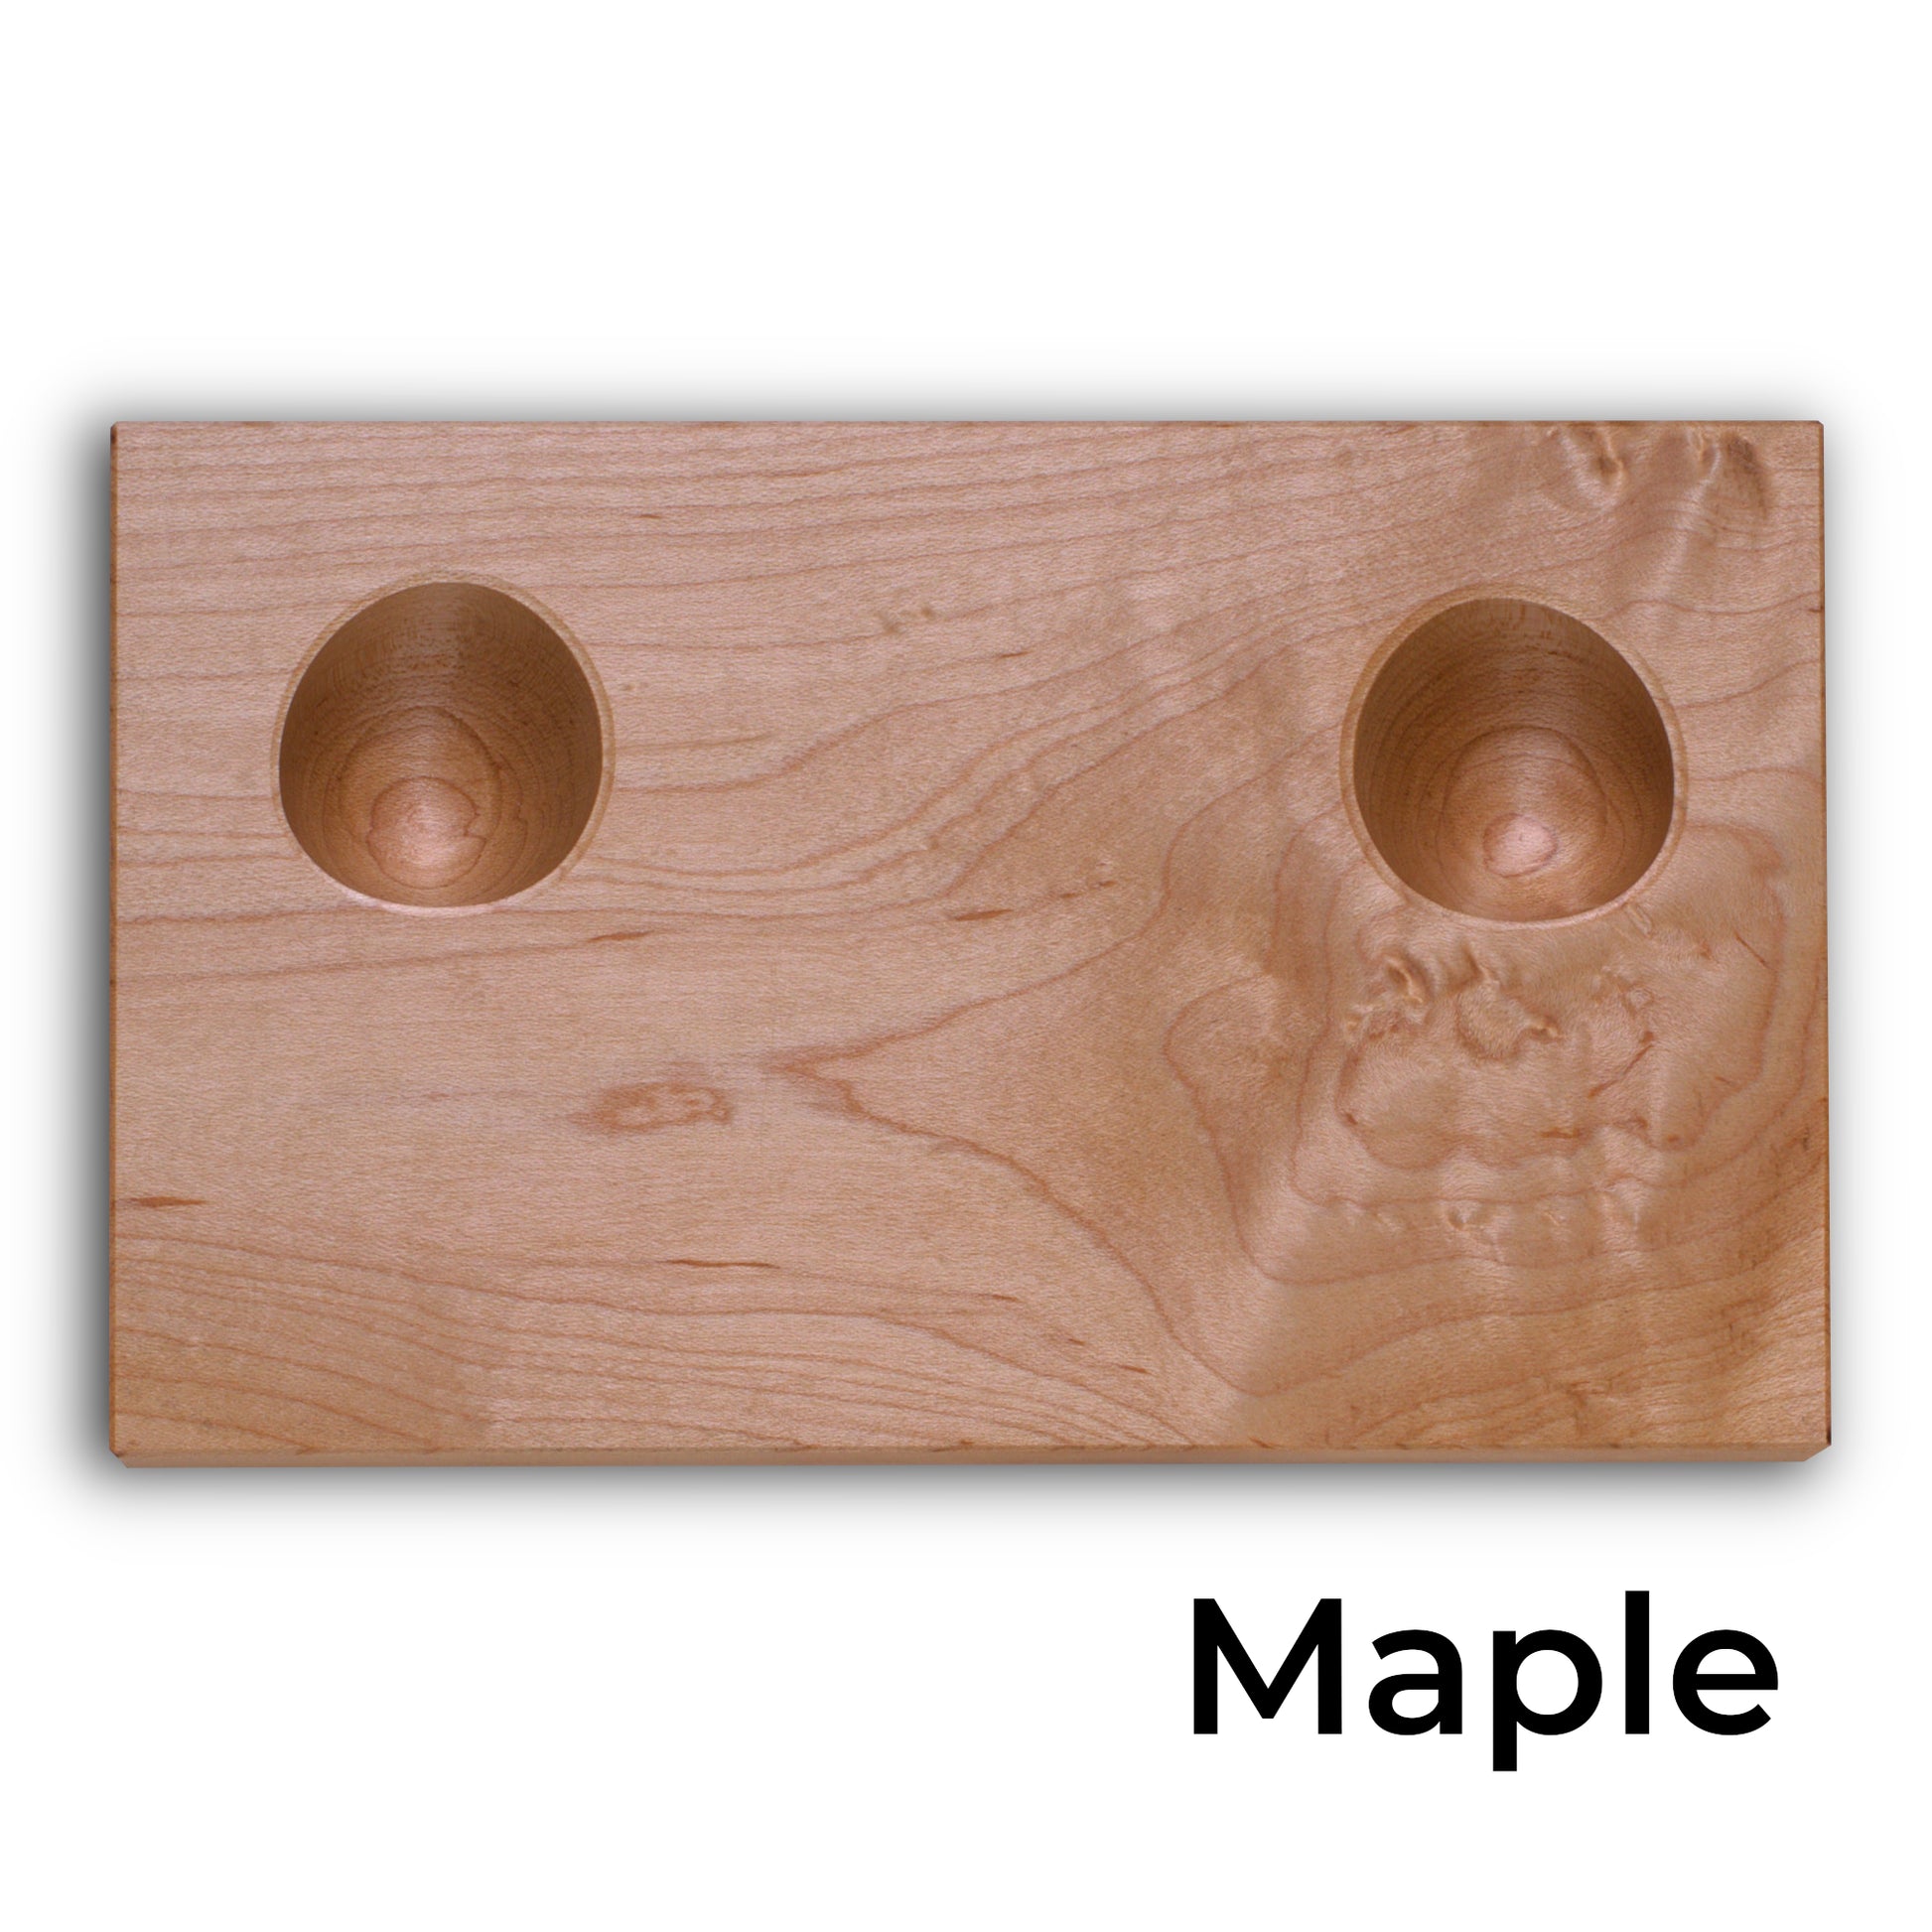 Wooden stand in maple for Xbox series X|S controller